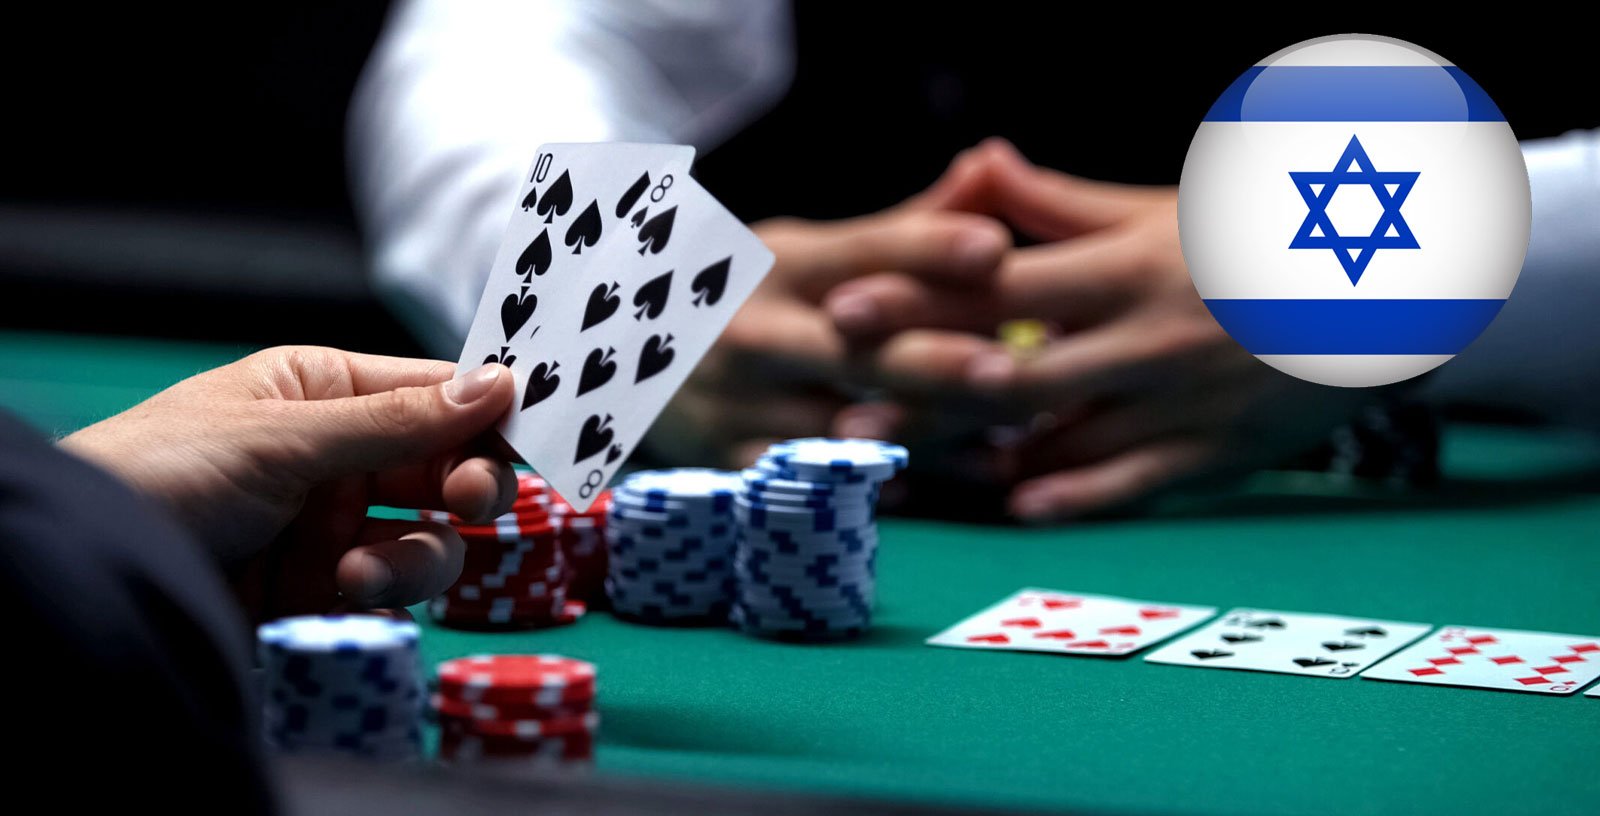 Israel’s Policy on Poker